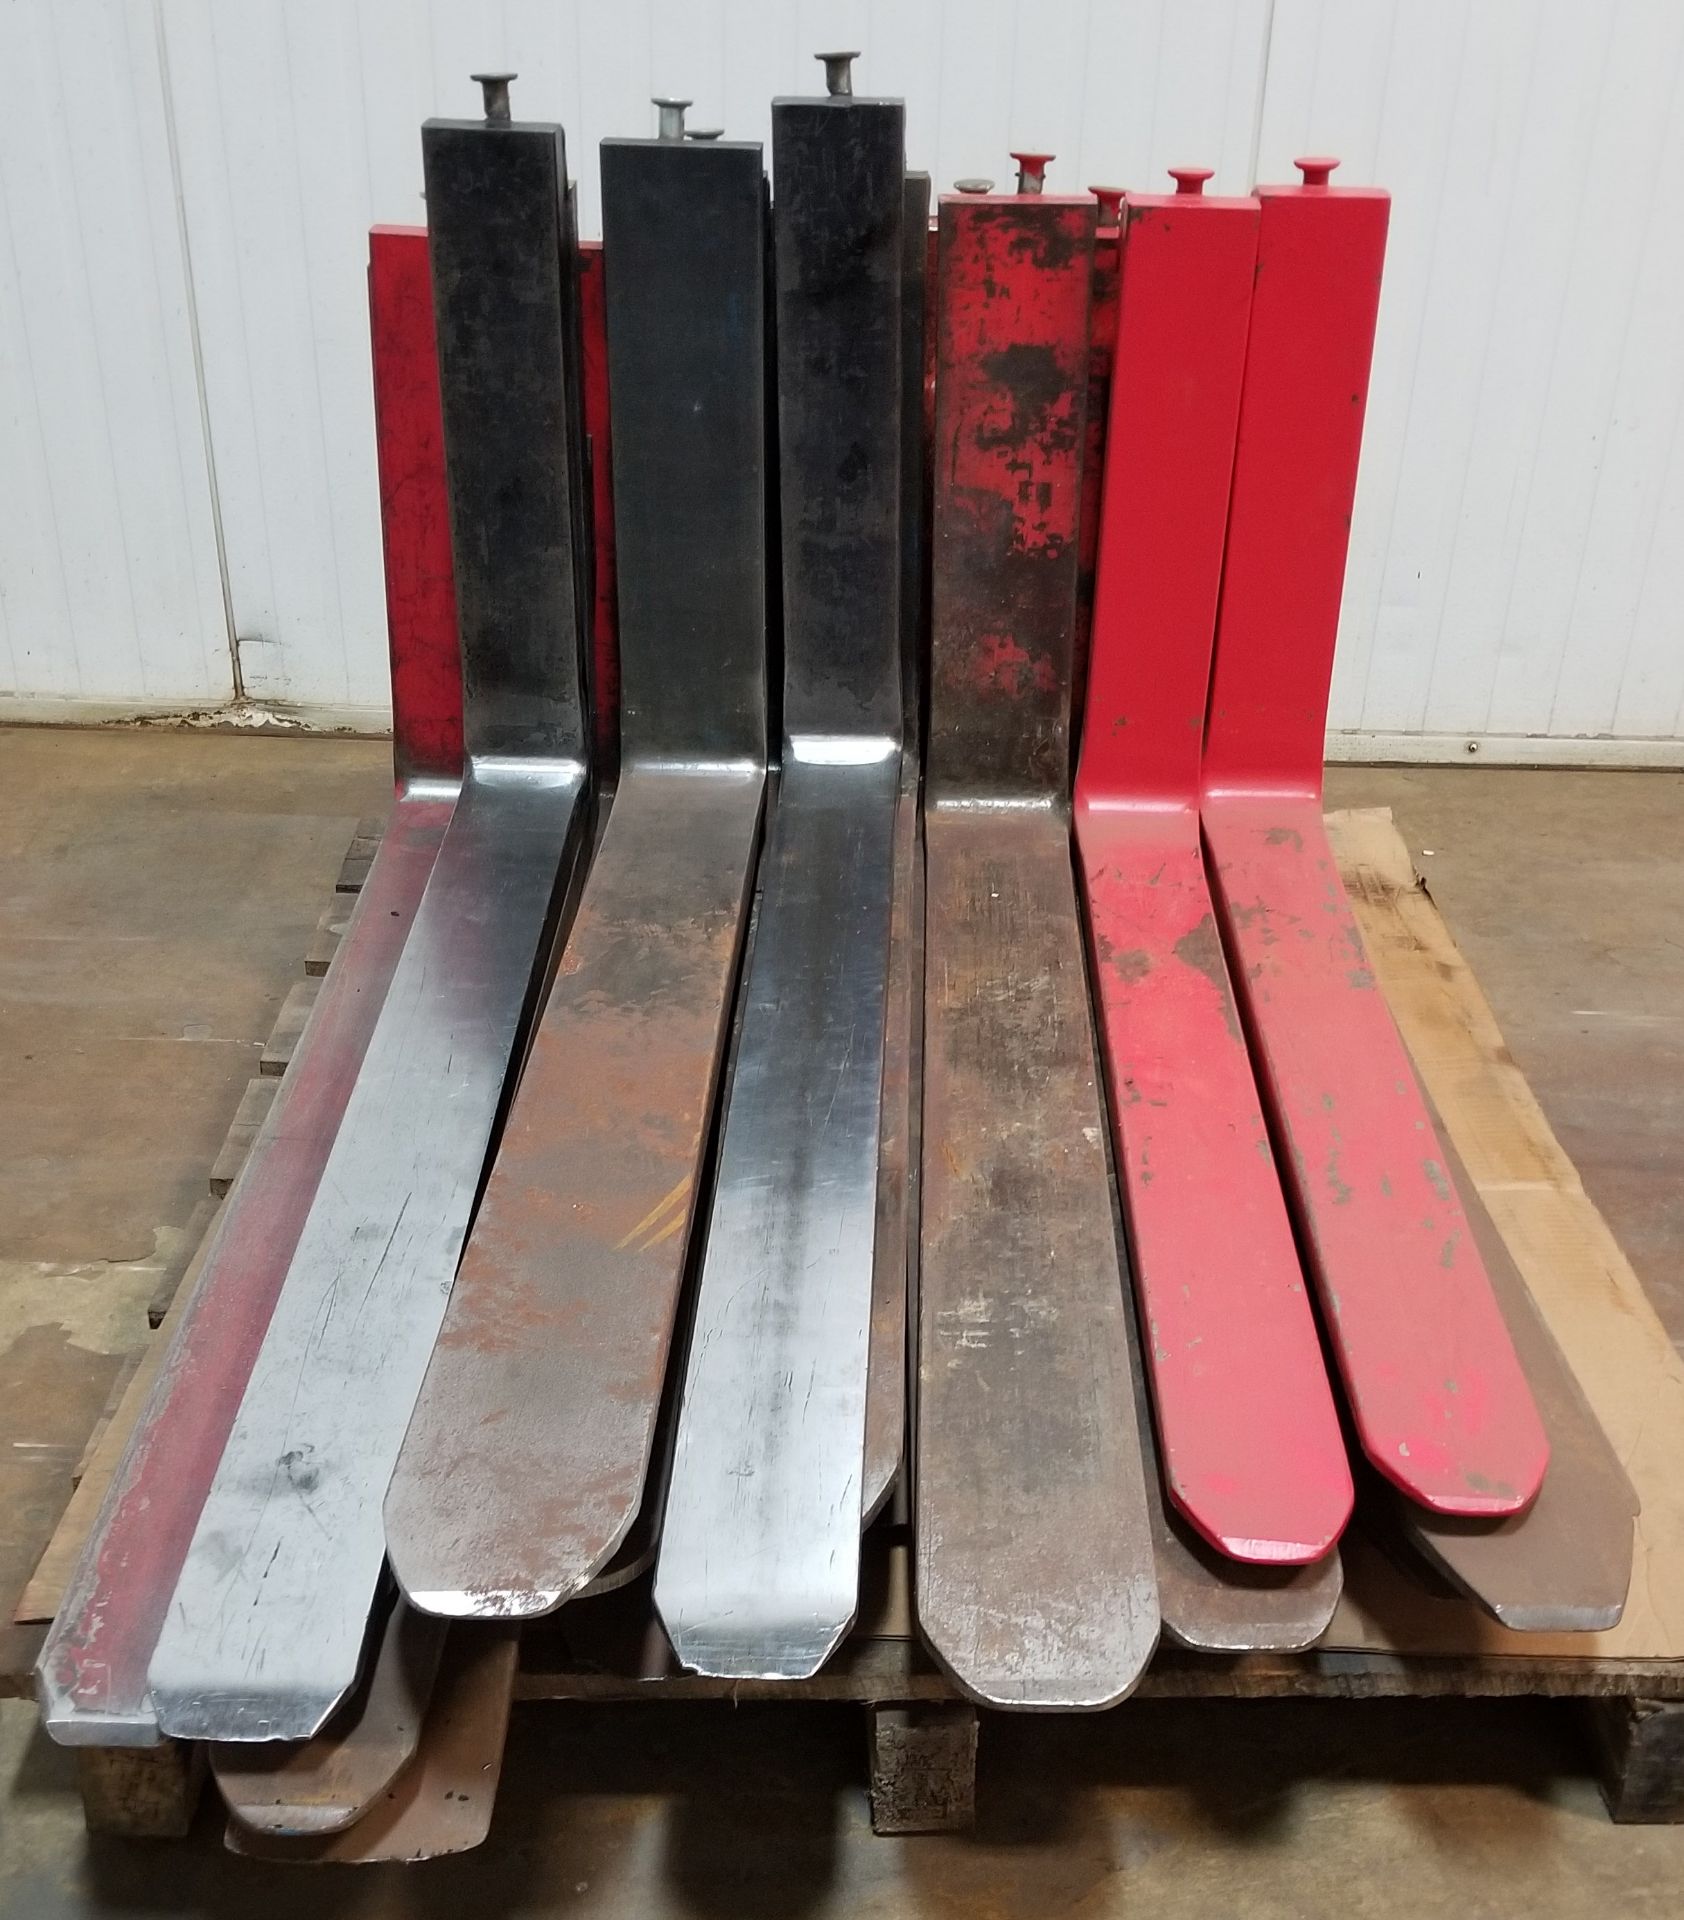 LOT/ SKID WITH (12) PAIRS OF CLASS 2 FORKLIFT FORKS [UNIT SH-2]